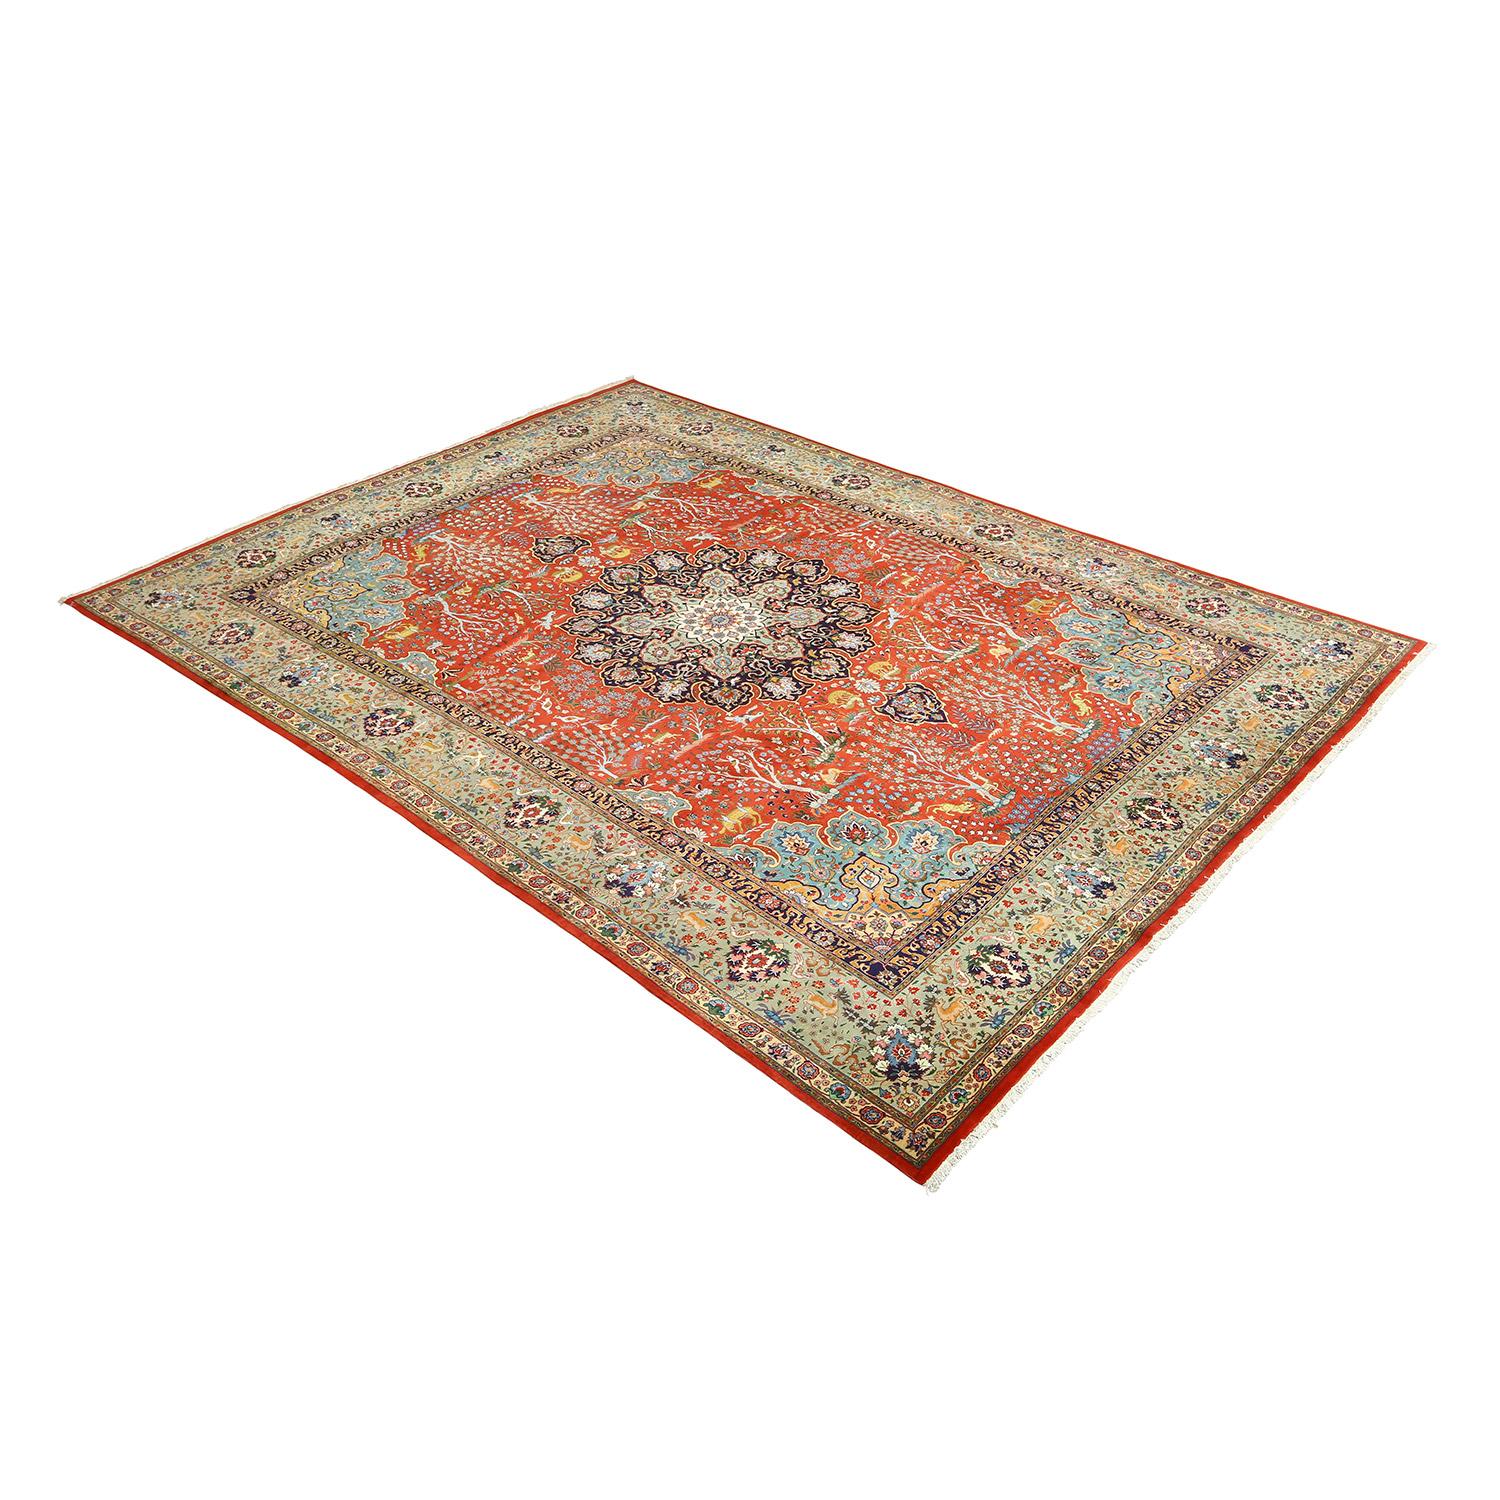 This exquisite vintage Tabriz Narvani rug, boasting a rich history of approximately 60 years, is a true masterpiece of Persian craftsmanship. Handwoven in the Tabriz region of Iran, this rug showcases the intricate artistry and traditional design